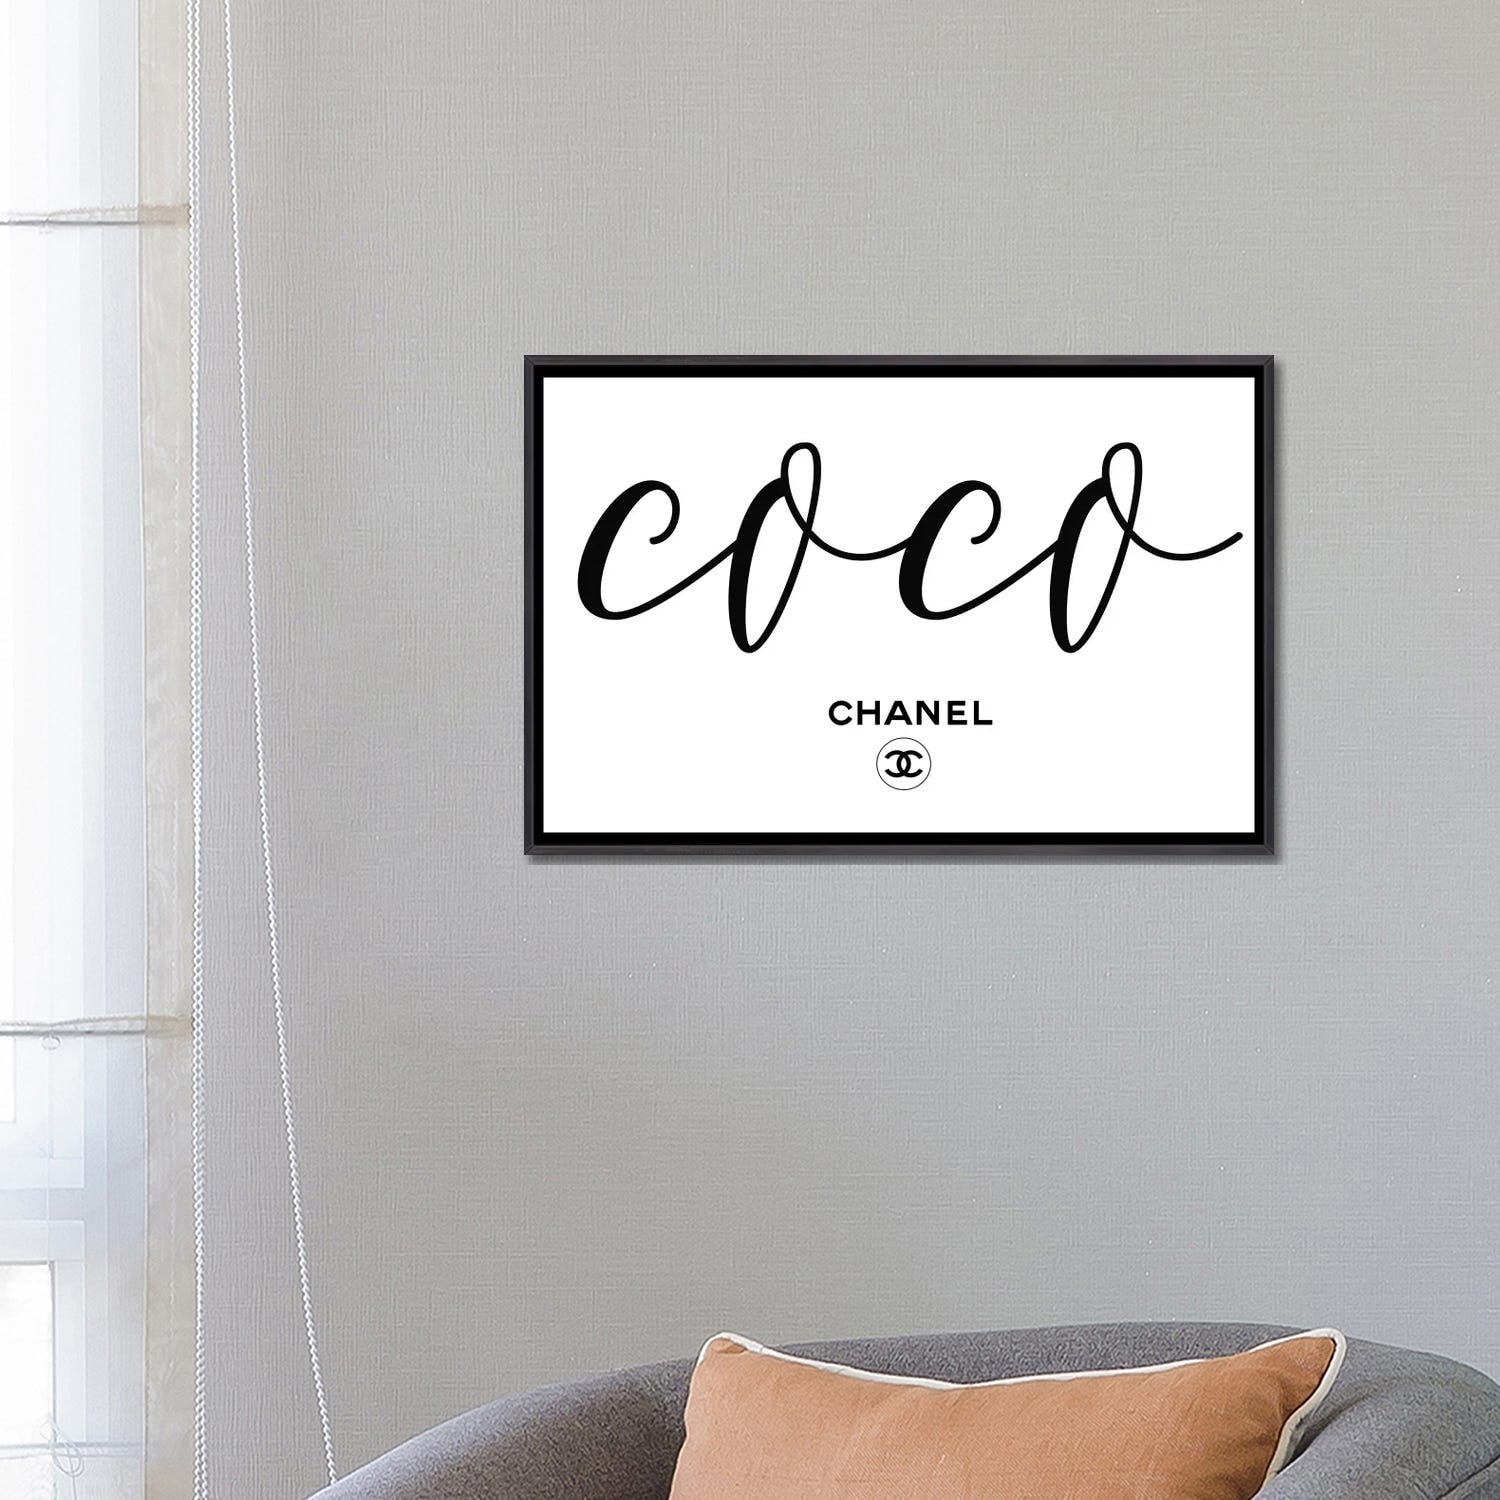 iCanvas Coco Chanel by Art Mirano Framed - Bed Bath & Beyond - 37656519